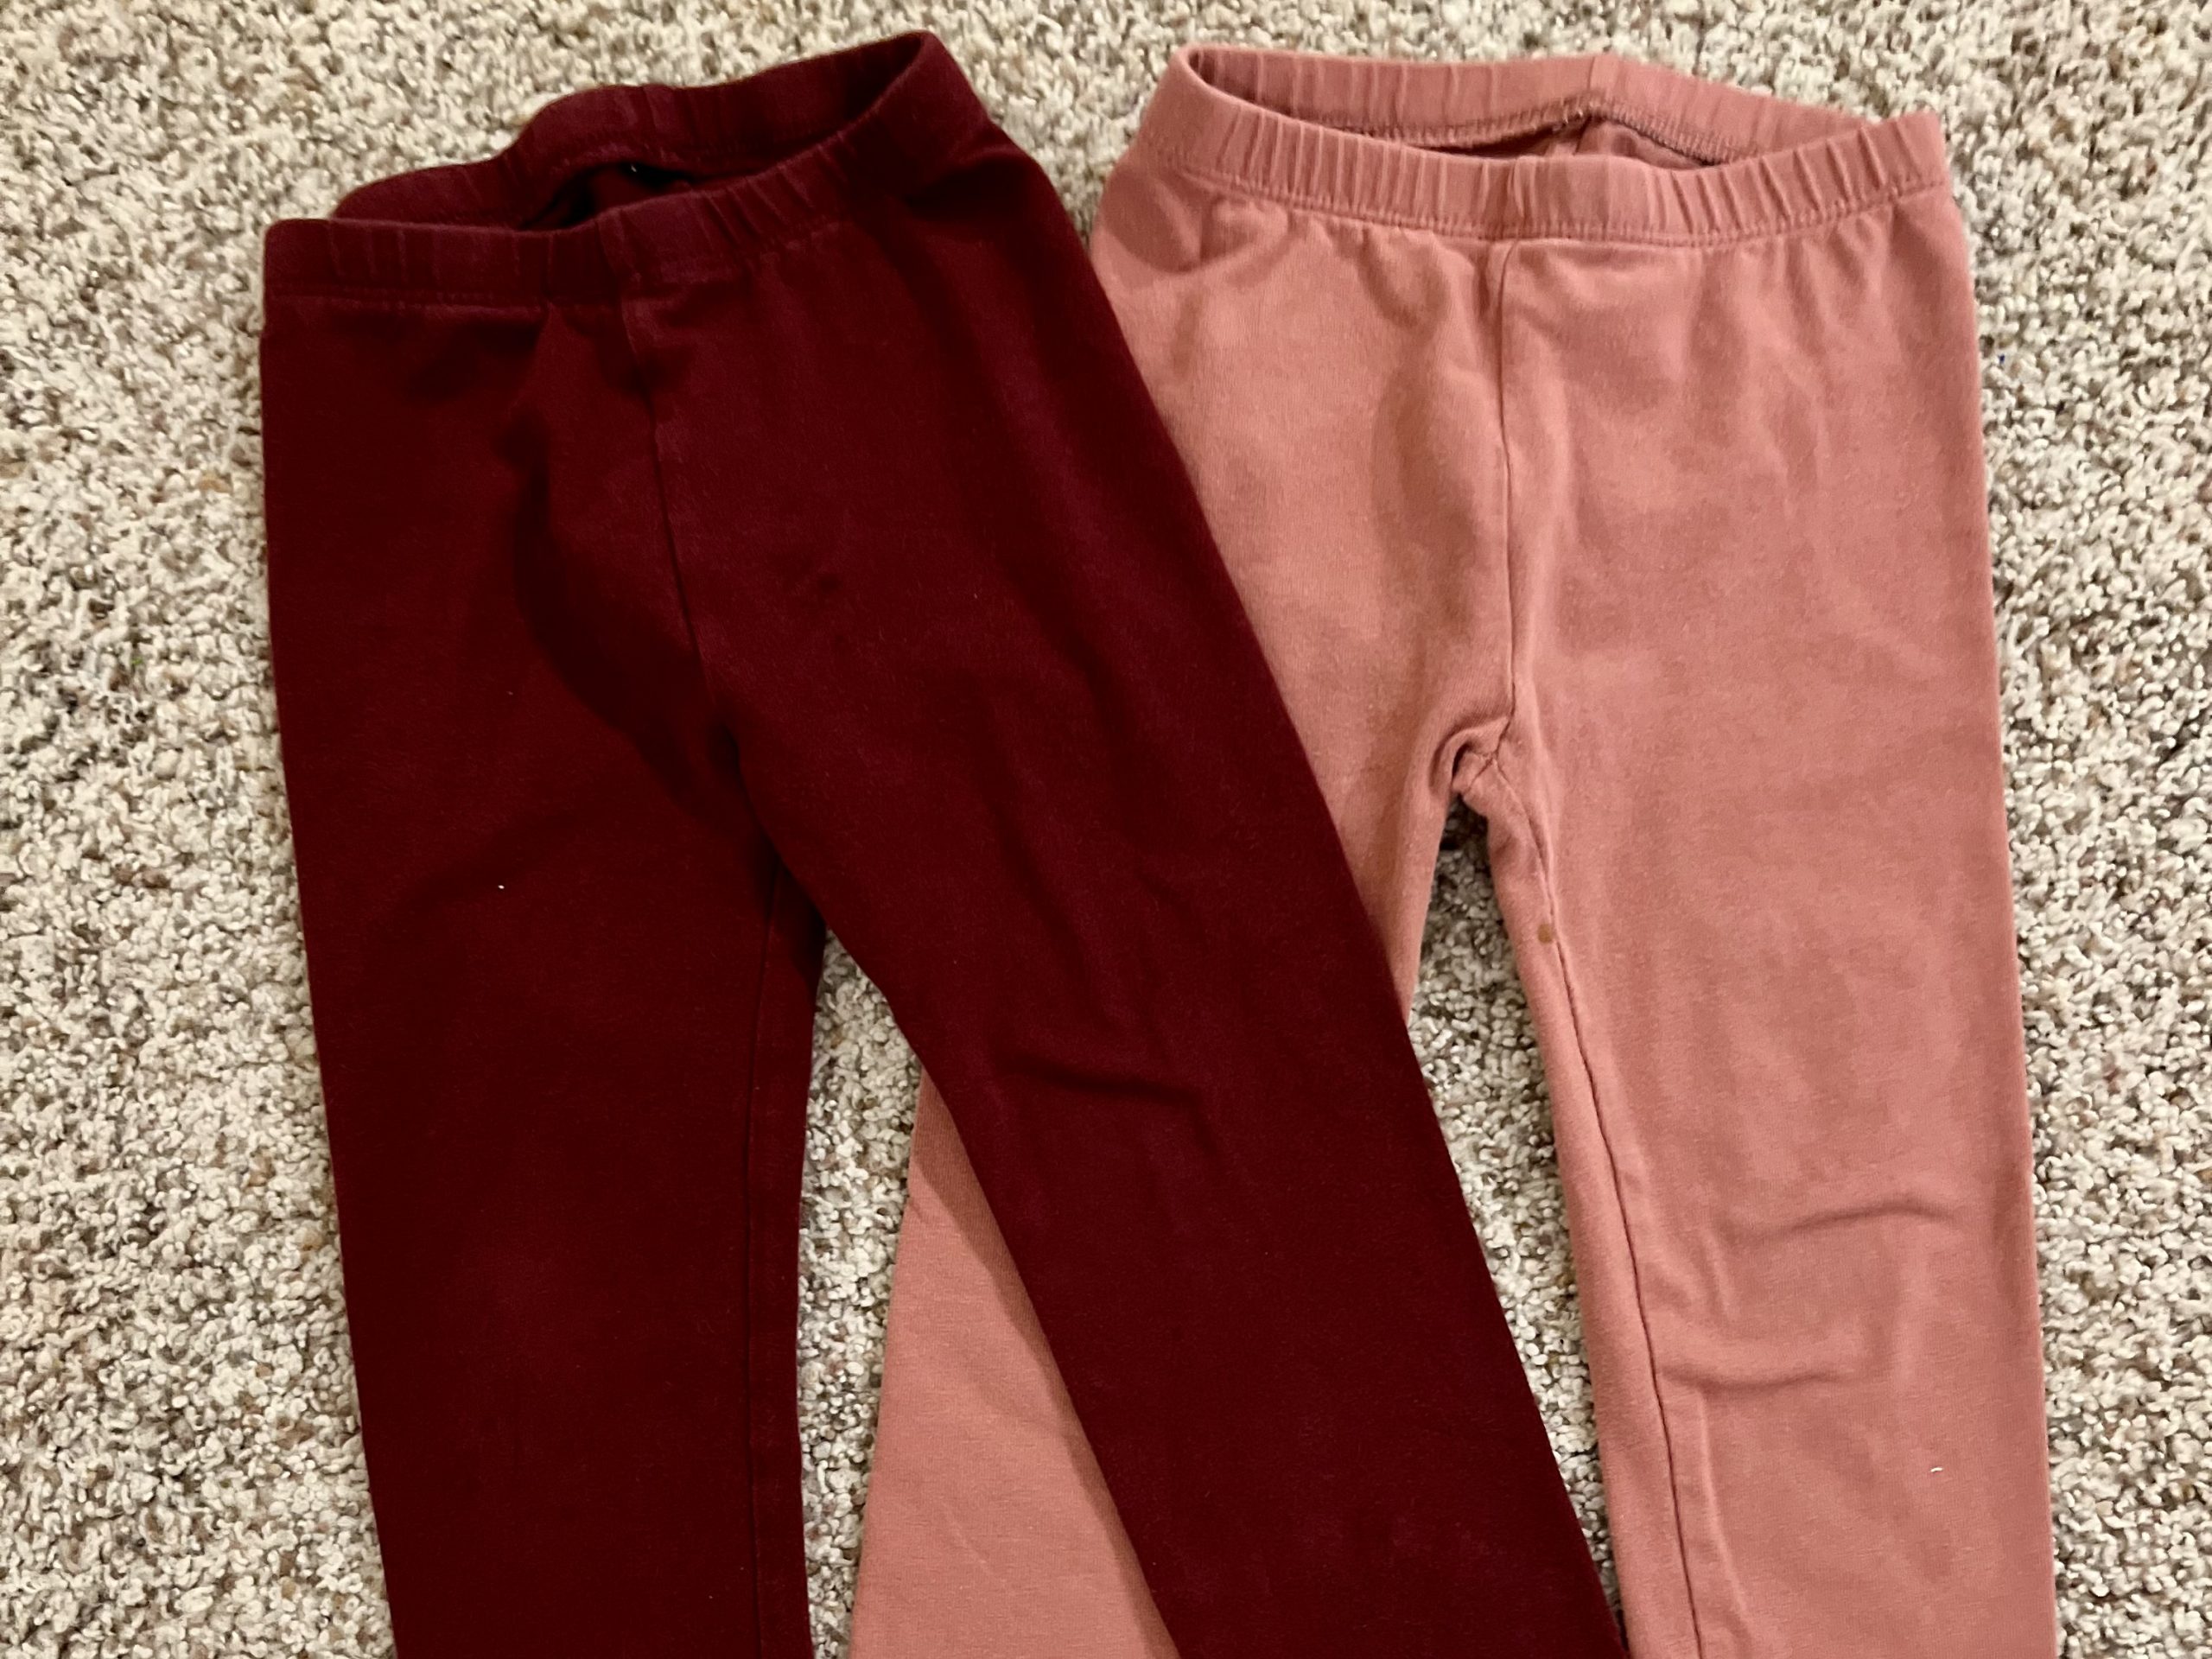 two pants choices while getting your child dressed